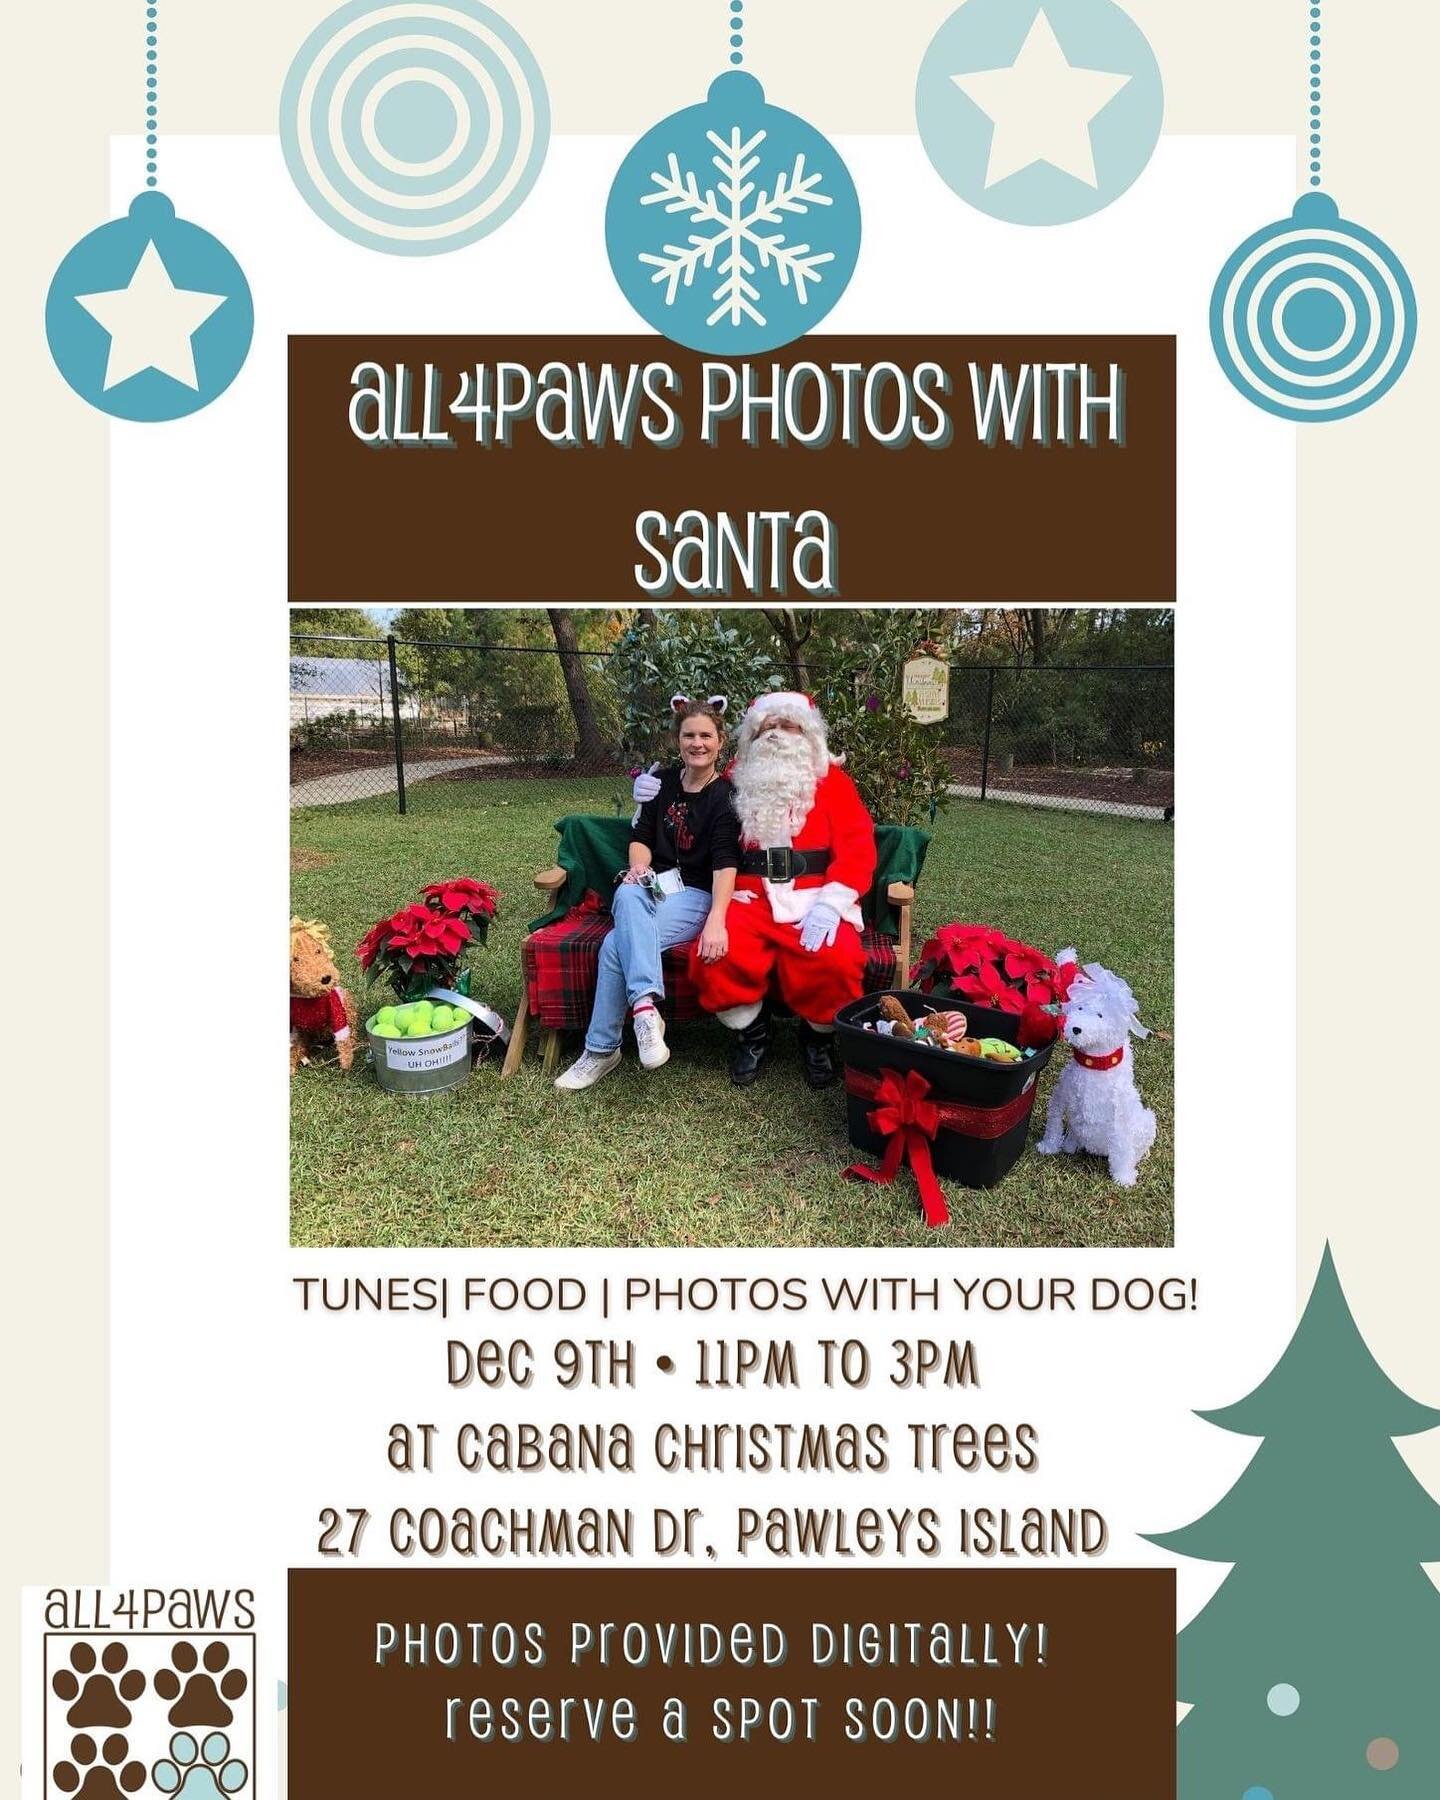 Join Cabana Christmas Trees this Saturday, December 9, 11am - 3pm, as we host All 4 Paws Animal Rescue for their annual photos with Santa fundraiser - pets and children! 
.
Going to be a great day! Come select the perfect Christmas Tree and take phot